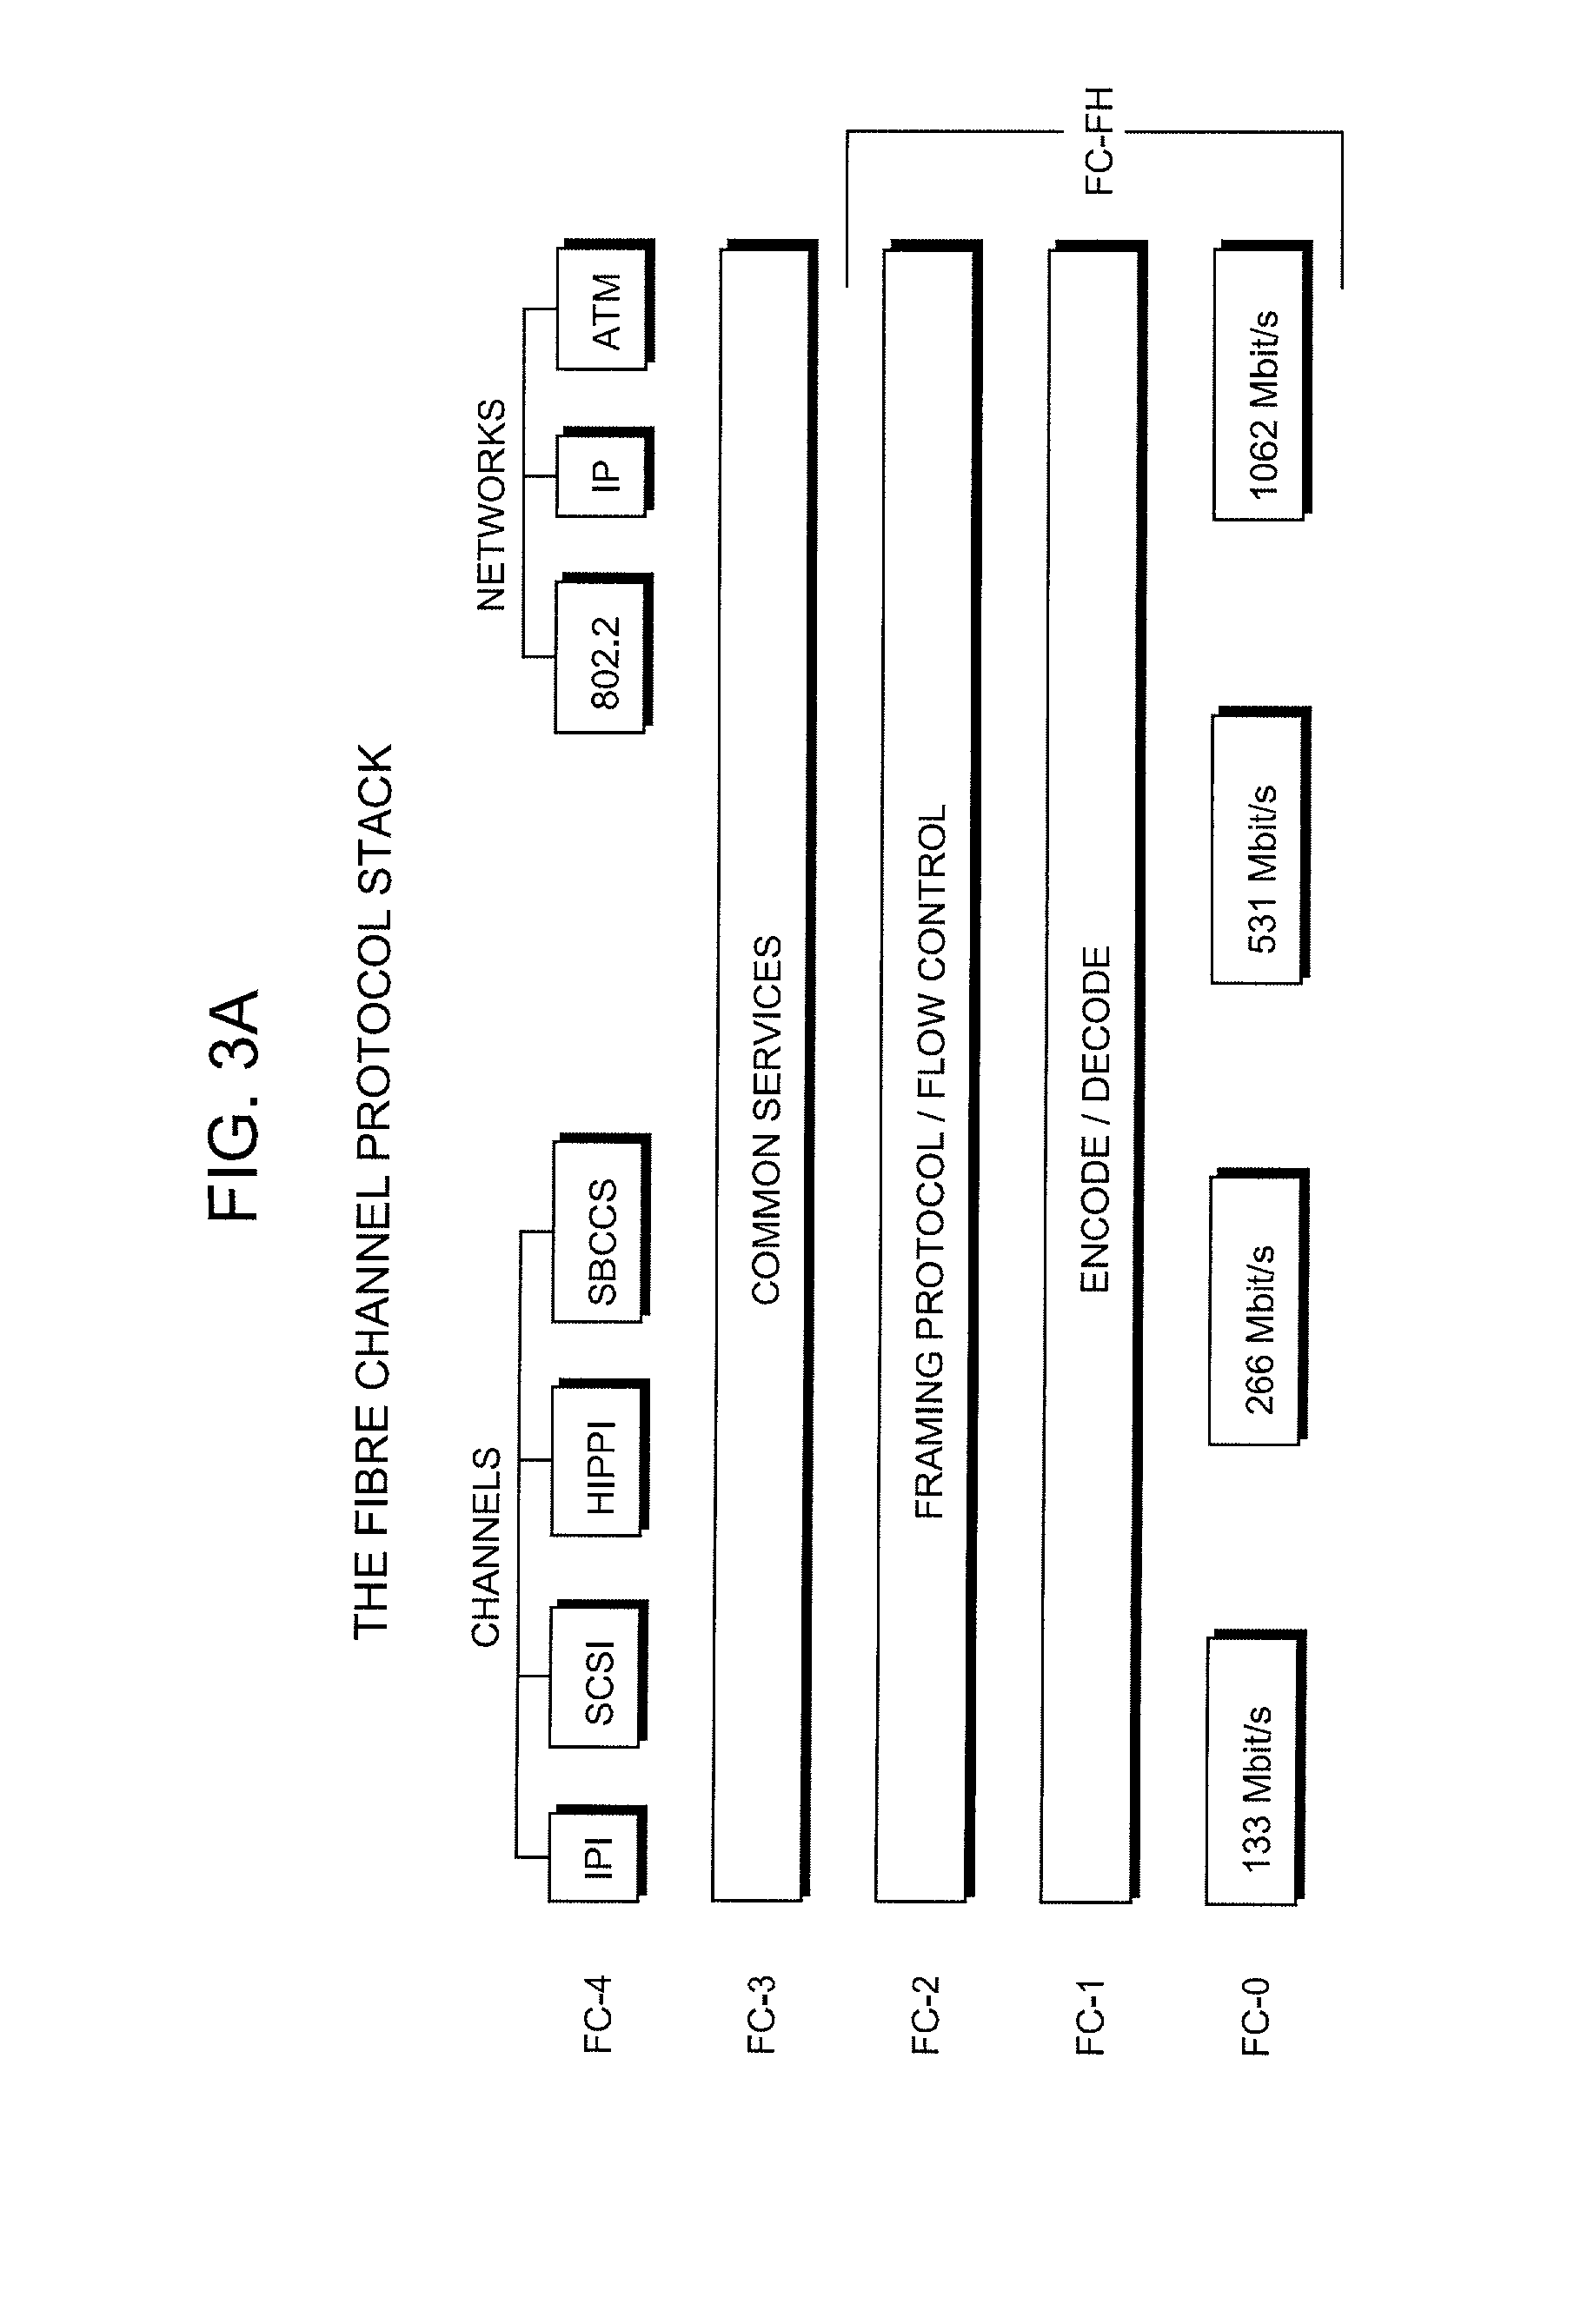 Method and system for providing multimedia information on demand over wide area networks